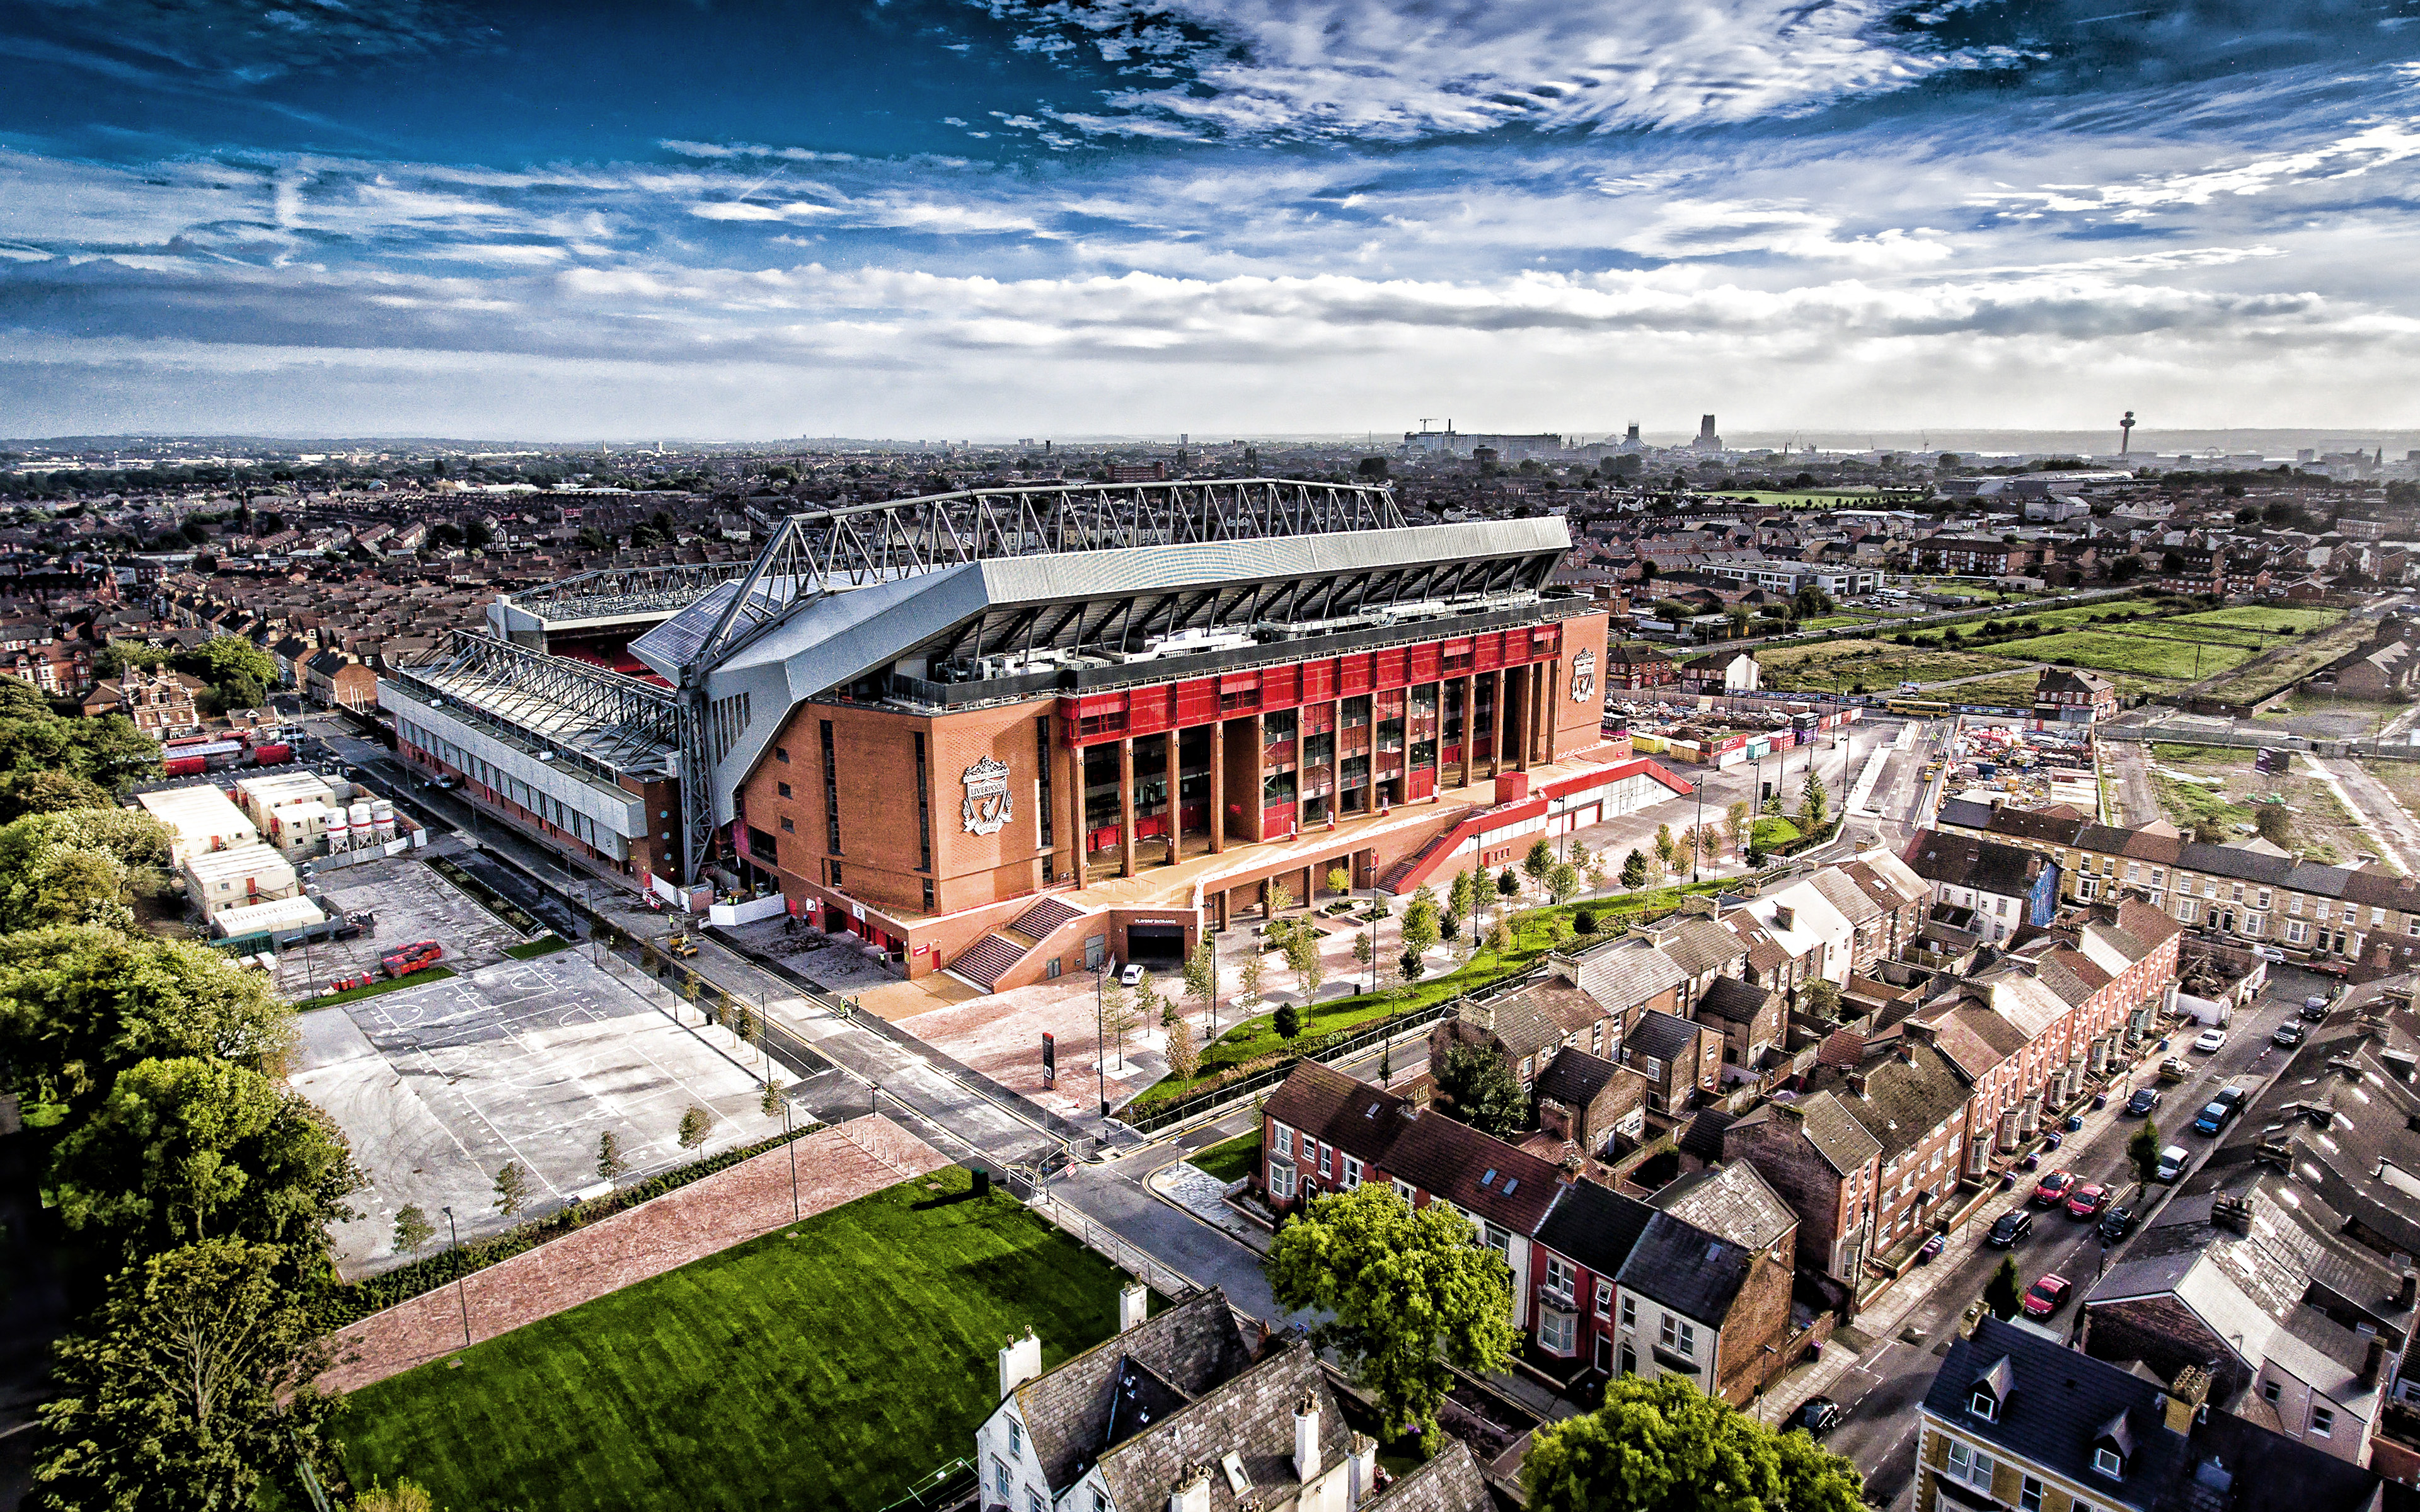 Download wallpaper Anfield, 4k, Liverpool stadium, England, HDR, soccer, Liverpool, football stadium, Anfield Road, Liverpool FC for desktop with resolution 3840x2400. High Quality HD picture wallpaper